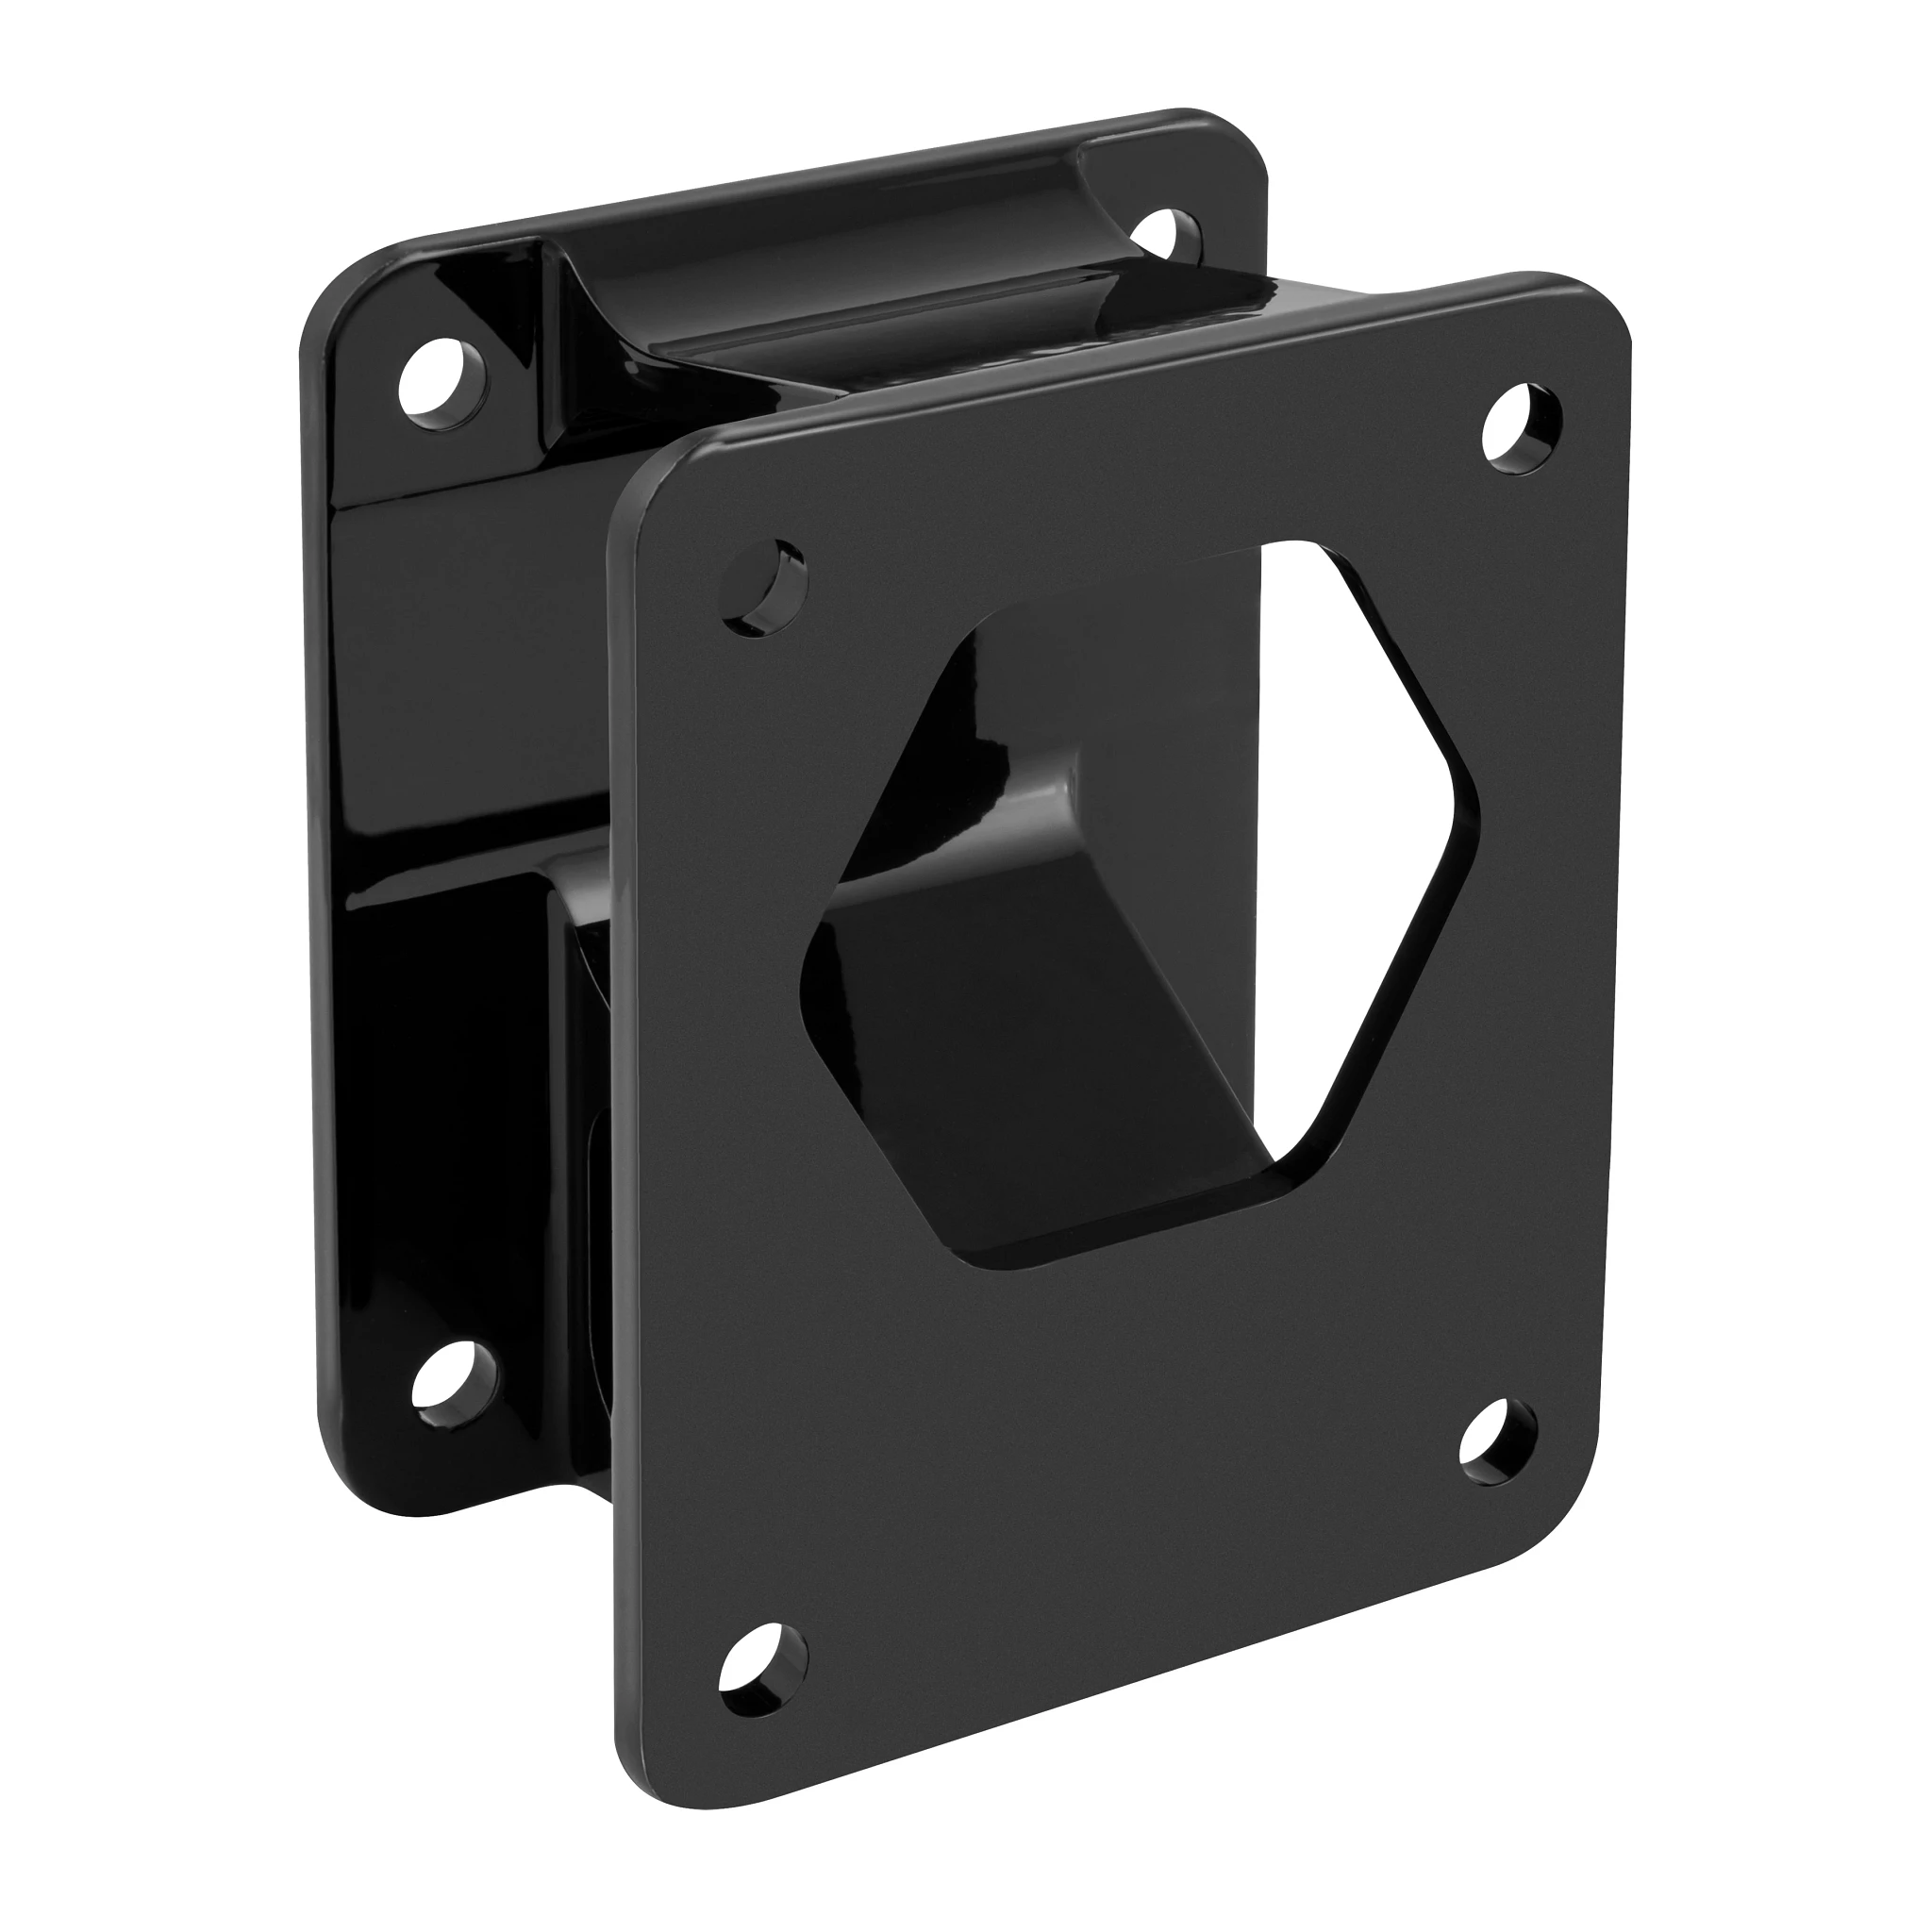 Angled view of black, setback bracket for Raptor shallow water anchor